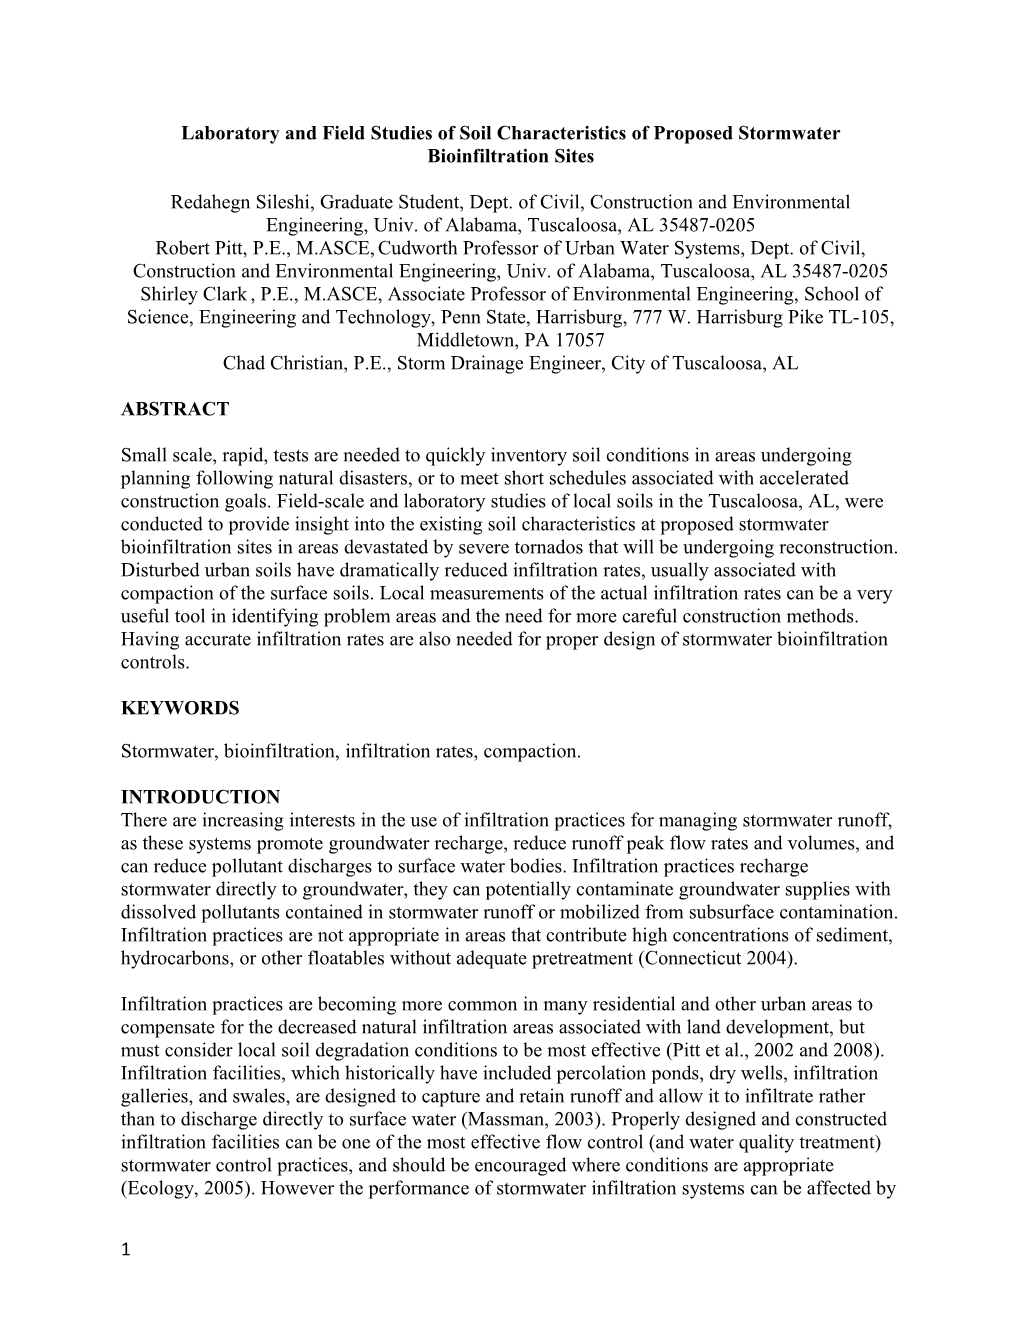 Laboratory and Field Studies of Soil Characteristicsof Proposed Stormwater Bioinfiltration